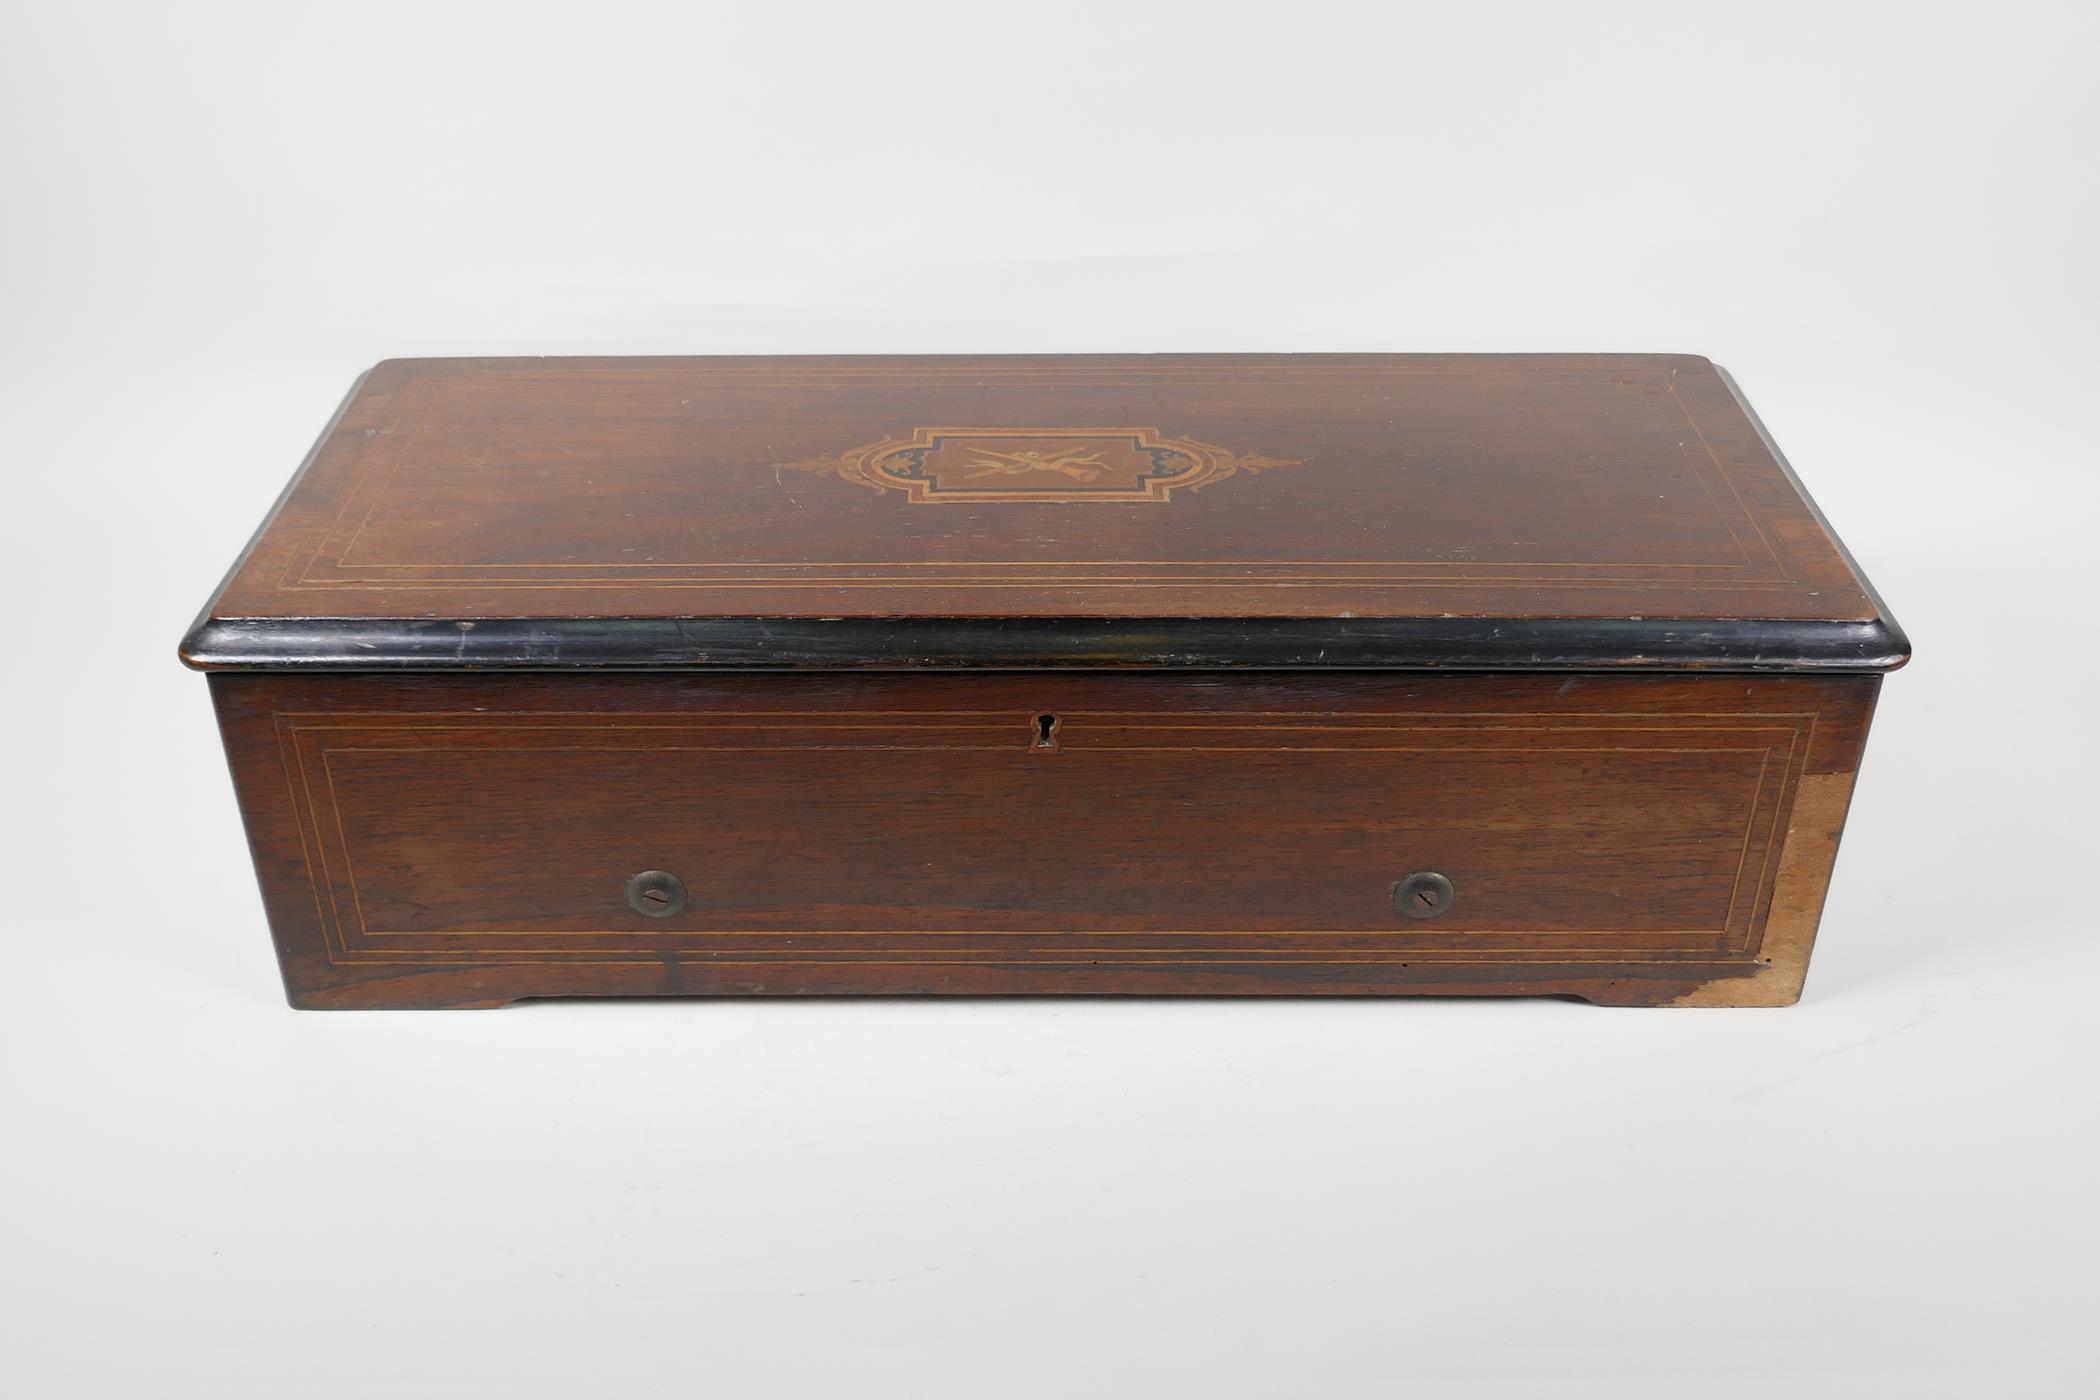 A C19th Swiss rosewood veneered music box with cross banded inlay, playing 6 aires, lacks melody